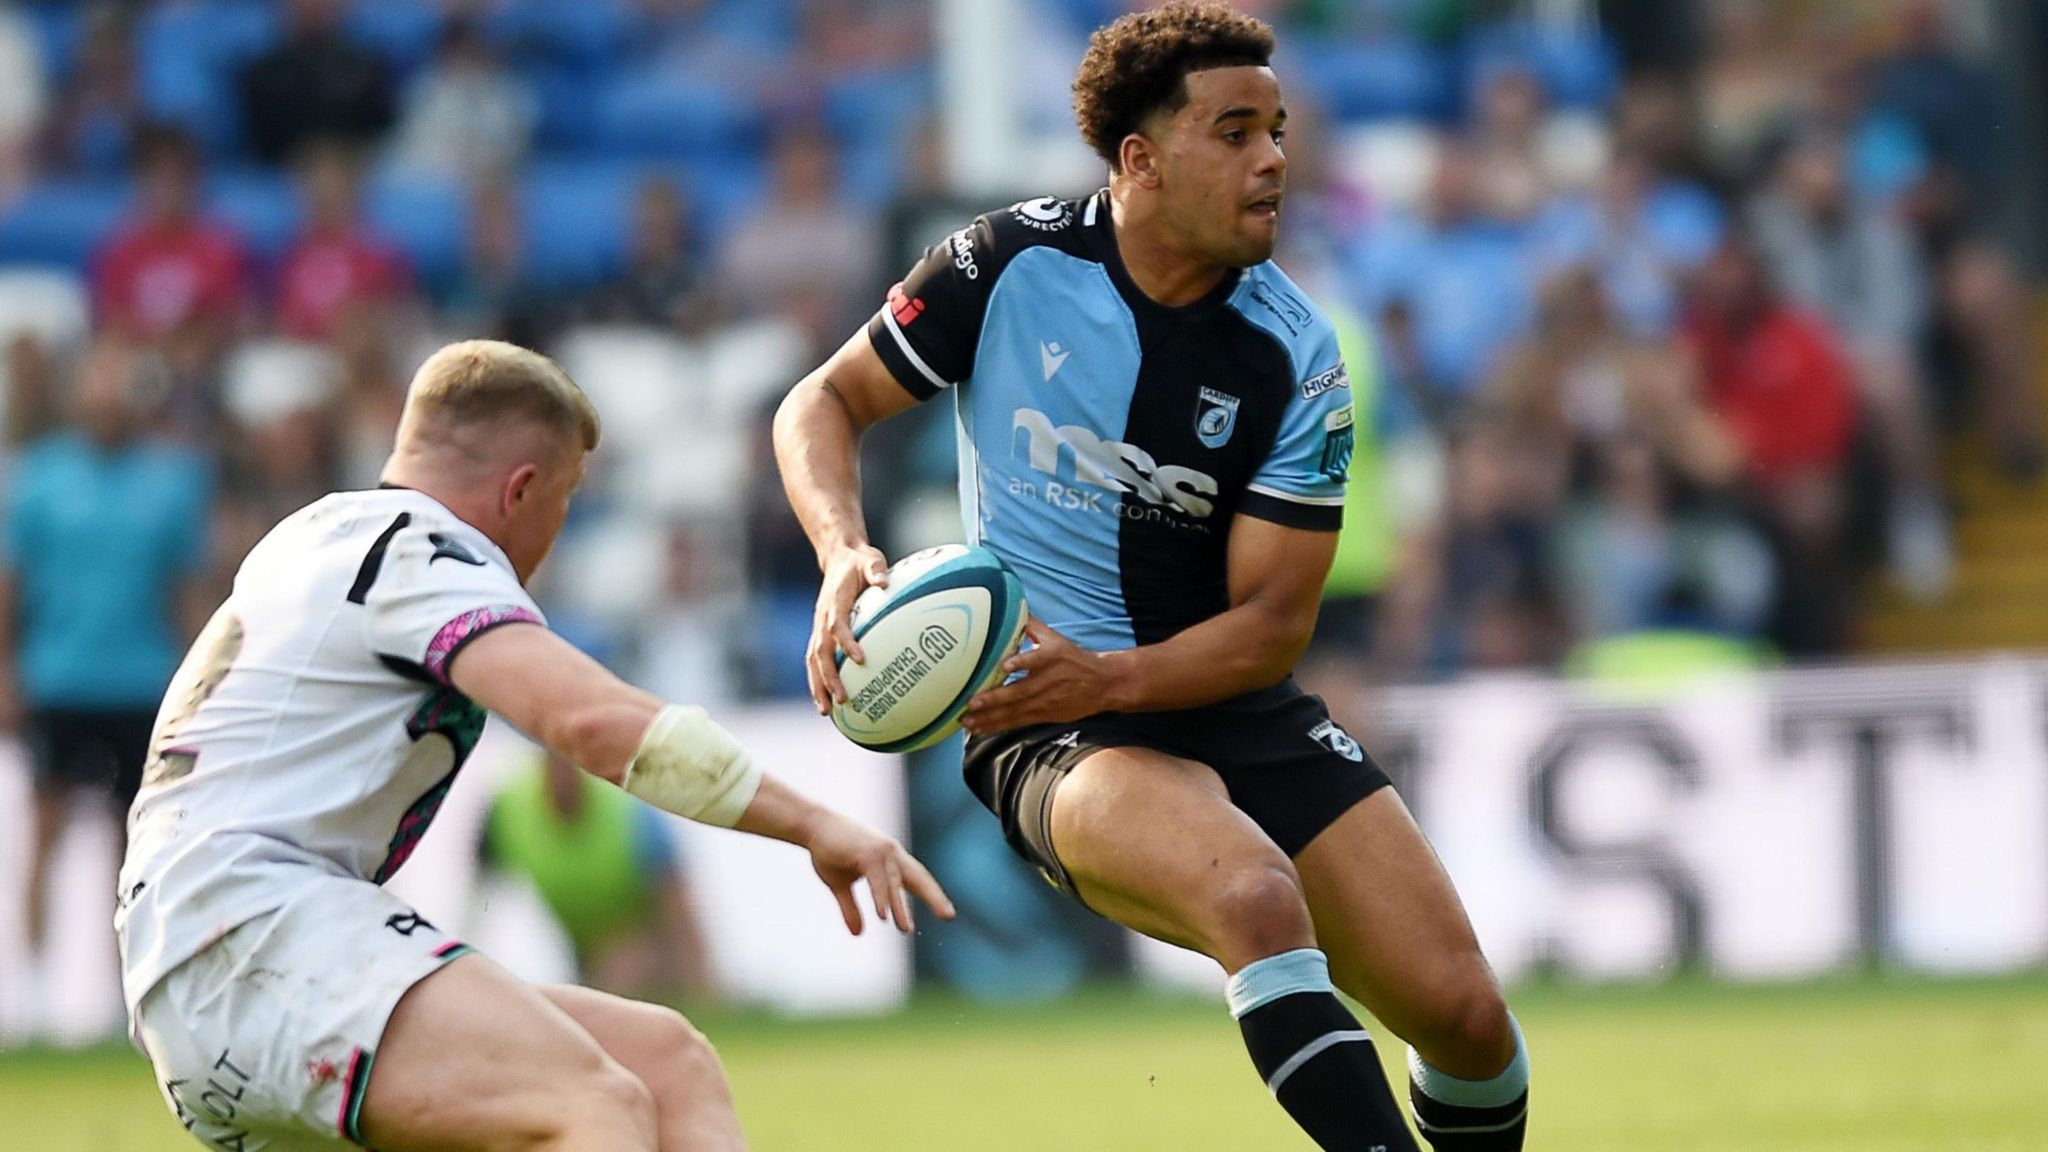 Centres Ben Thomas and Keiran Williams both impressed in the Judgement Day derby between Ospreys and Cardiff